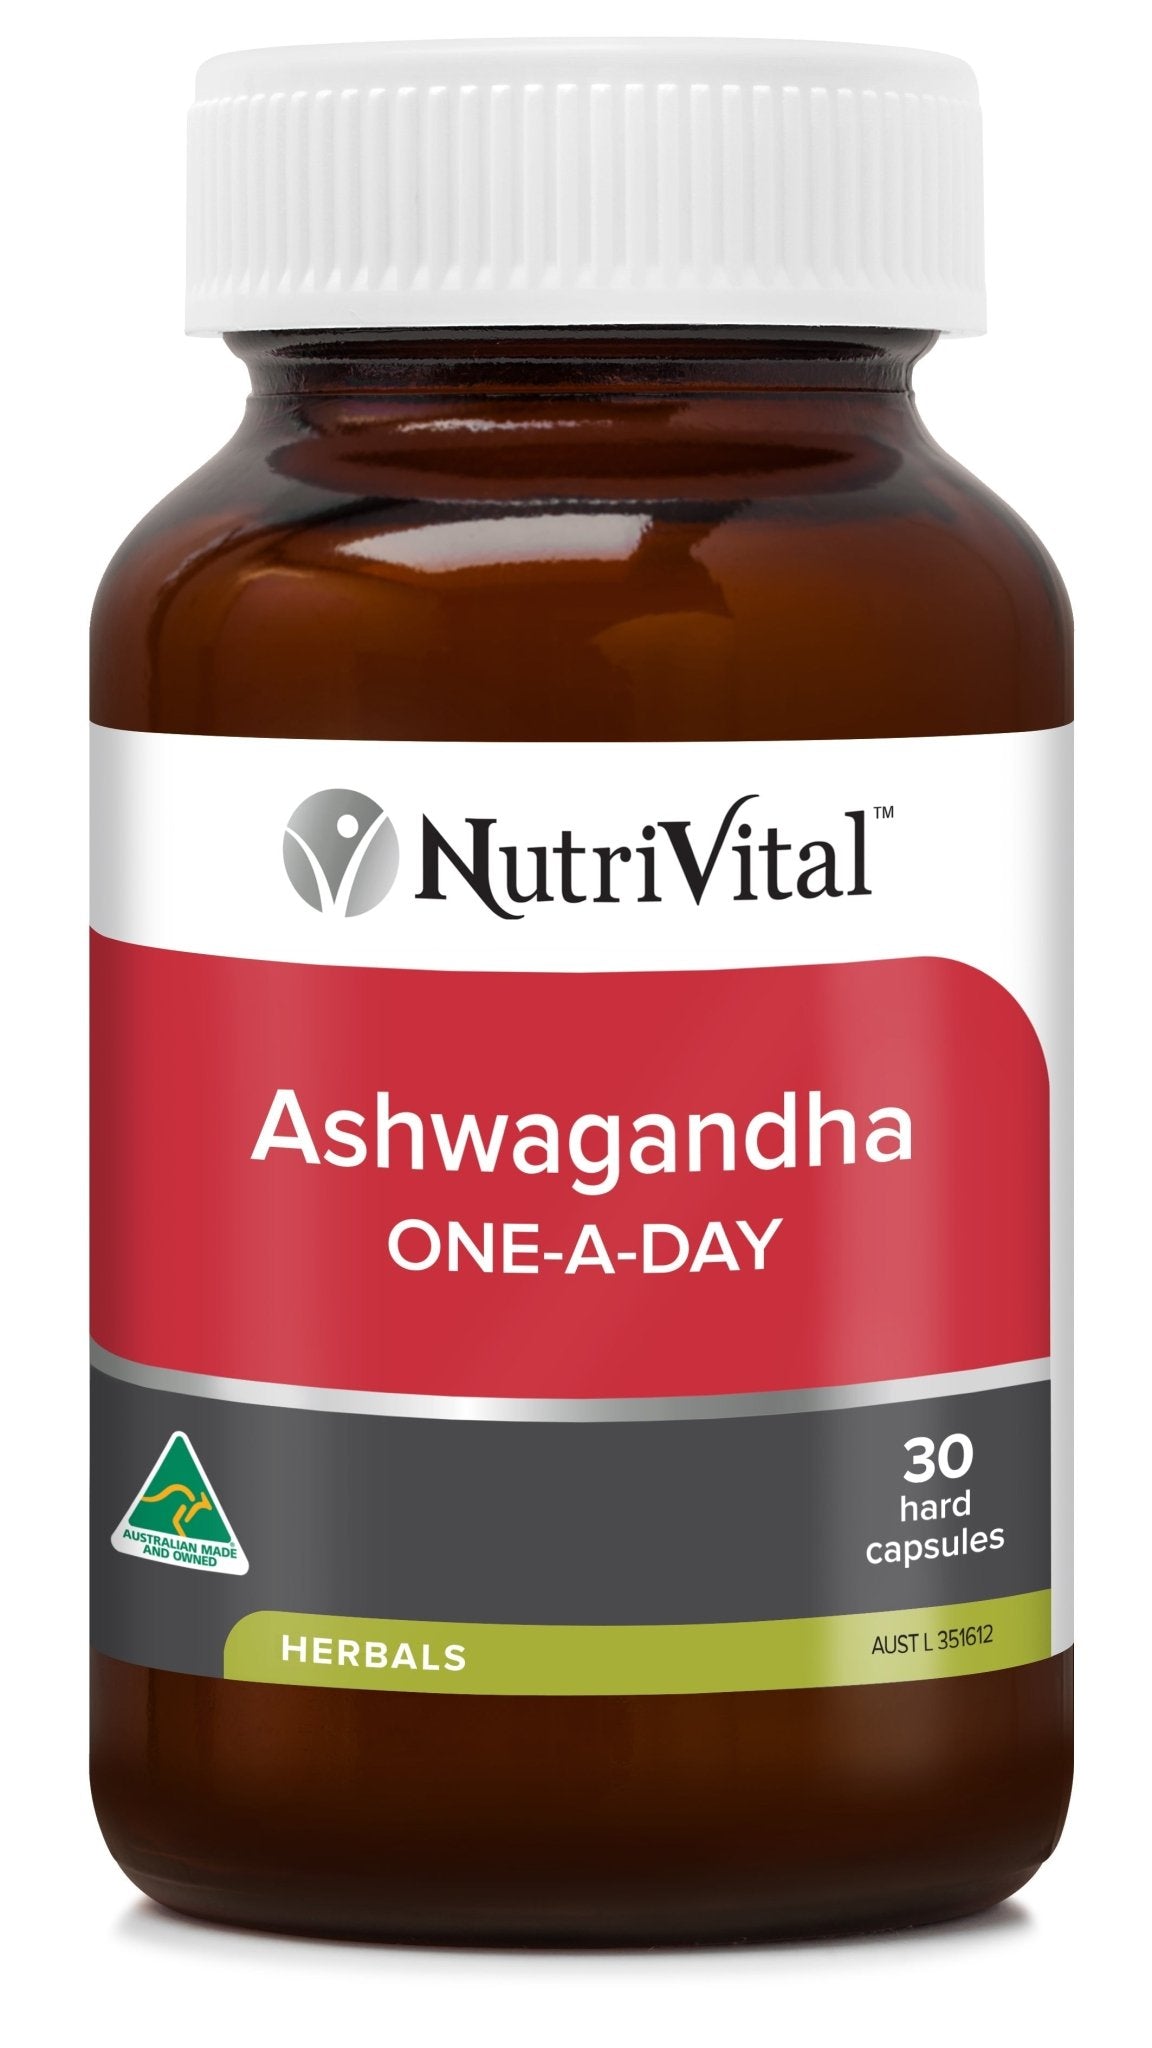 NutriVital Ashwagandha One-A-Day Capsules 30 capsules - Dr Earth - Supplements, Nutrivital